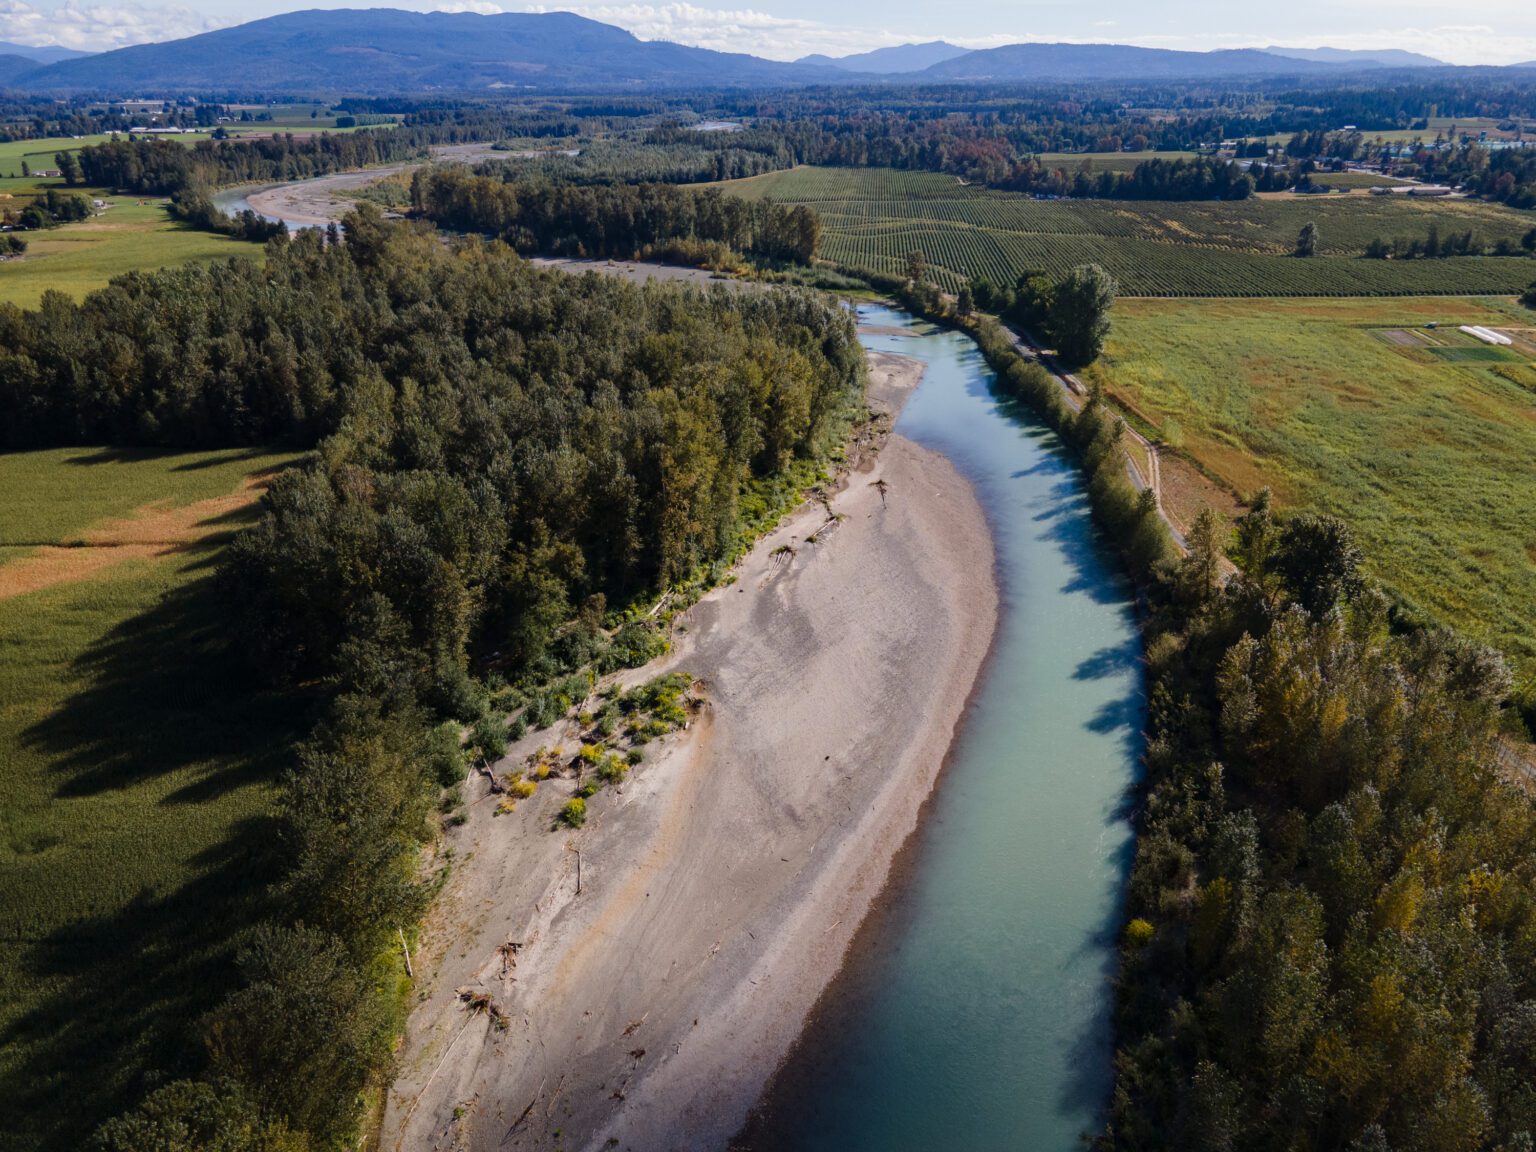 The county plans to remove vegetation and gravel from about 150 feet of the Nooksack River near Everson. The goal